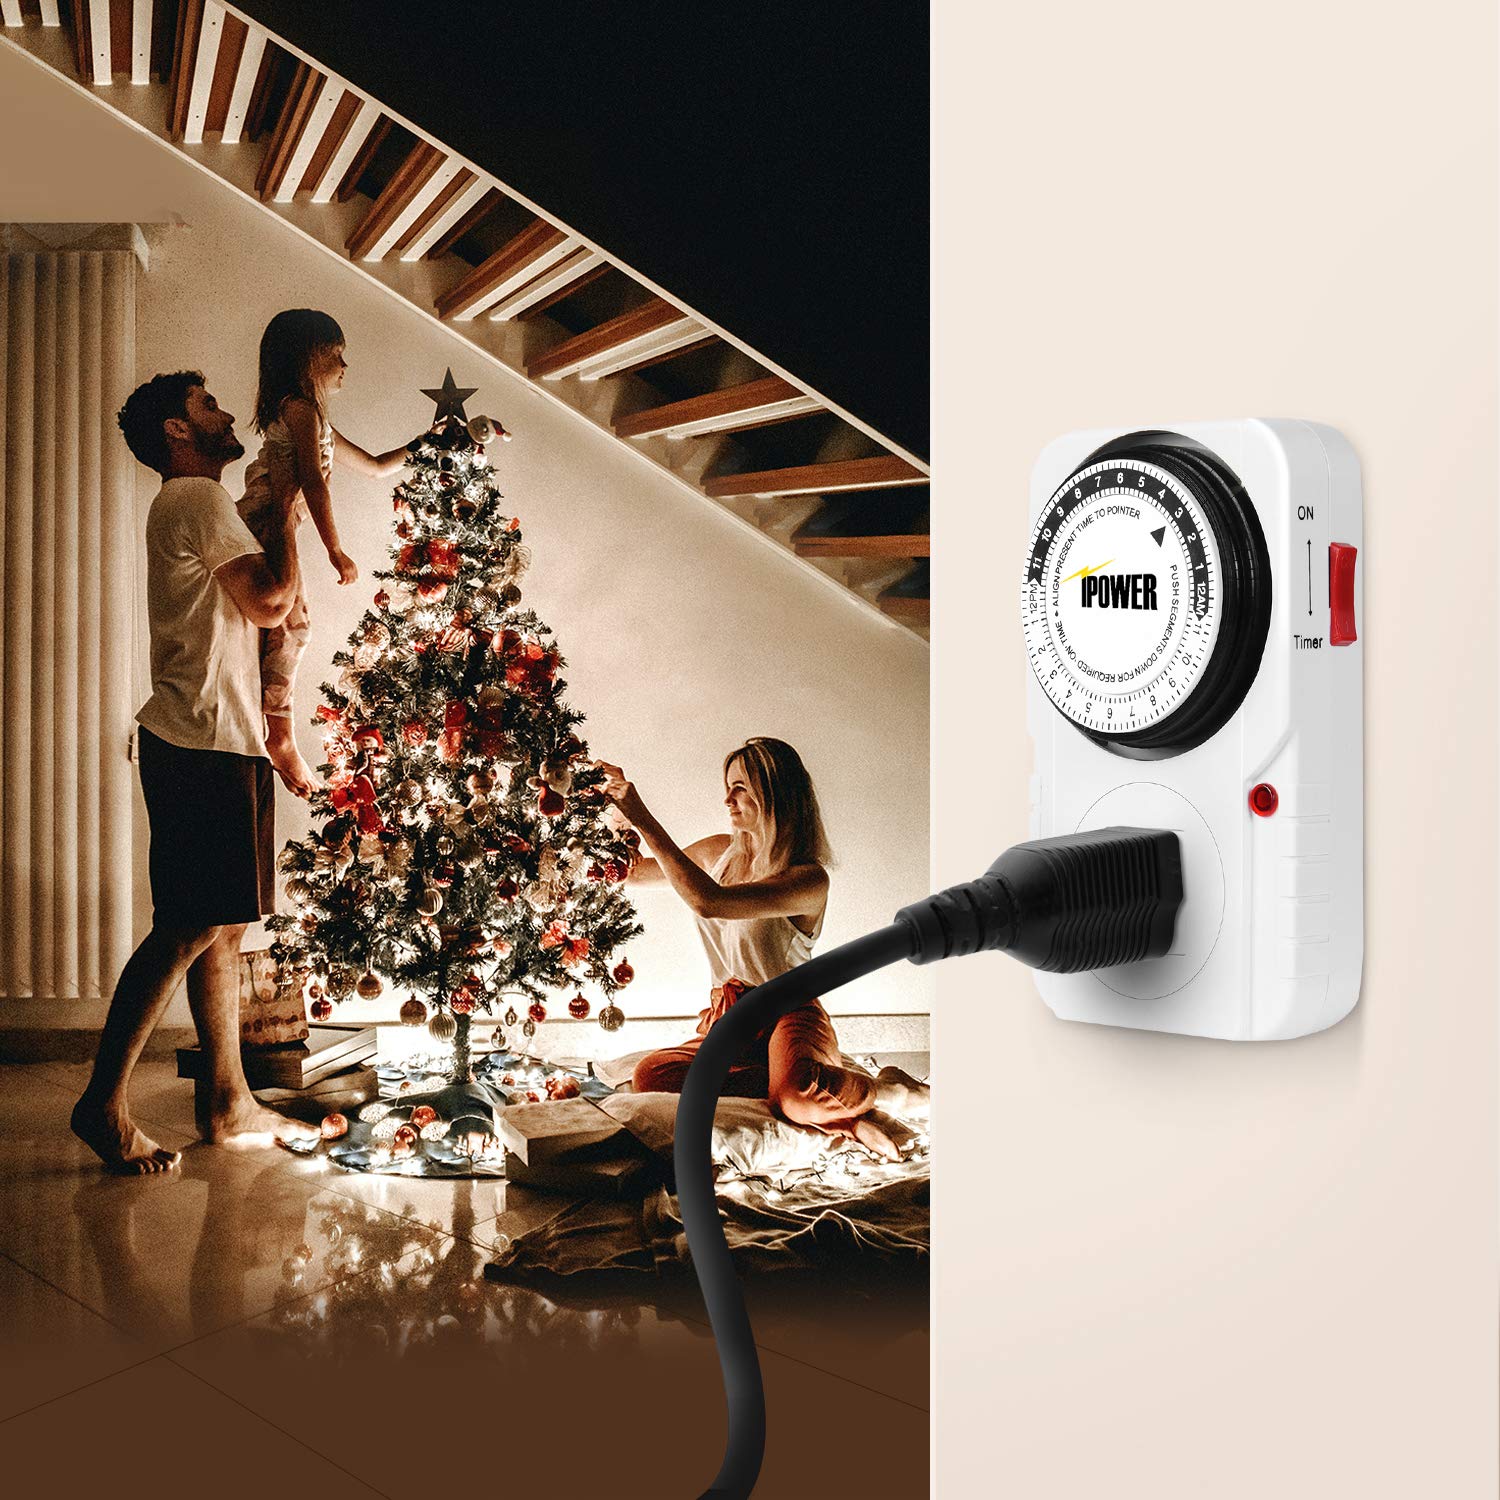 iPower 24 Hour Plug-in Mechanical Electric Outlet Timers Switch Programmable Indoor, Accurate Heavy Duty 3-Prong for Lamps Fans Christmas String Lights, AC 1725W 1/2 HP, UL Listed